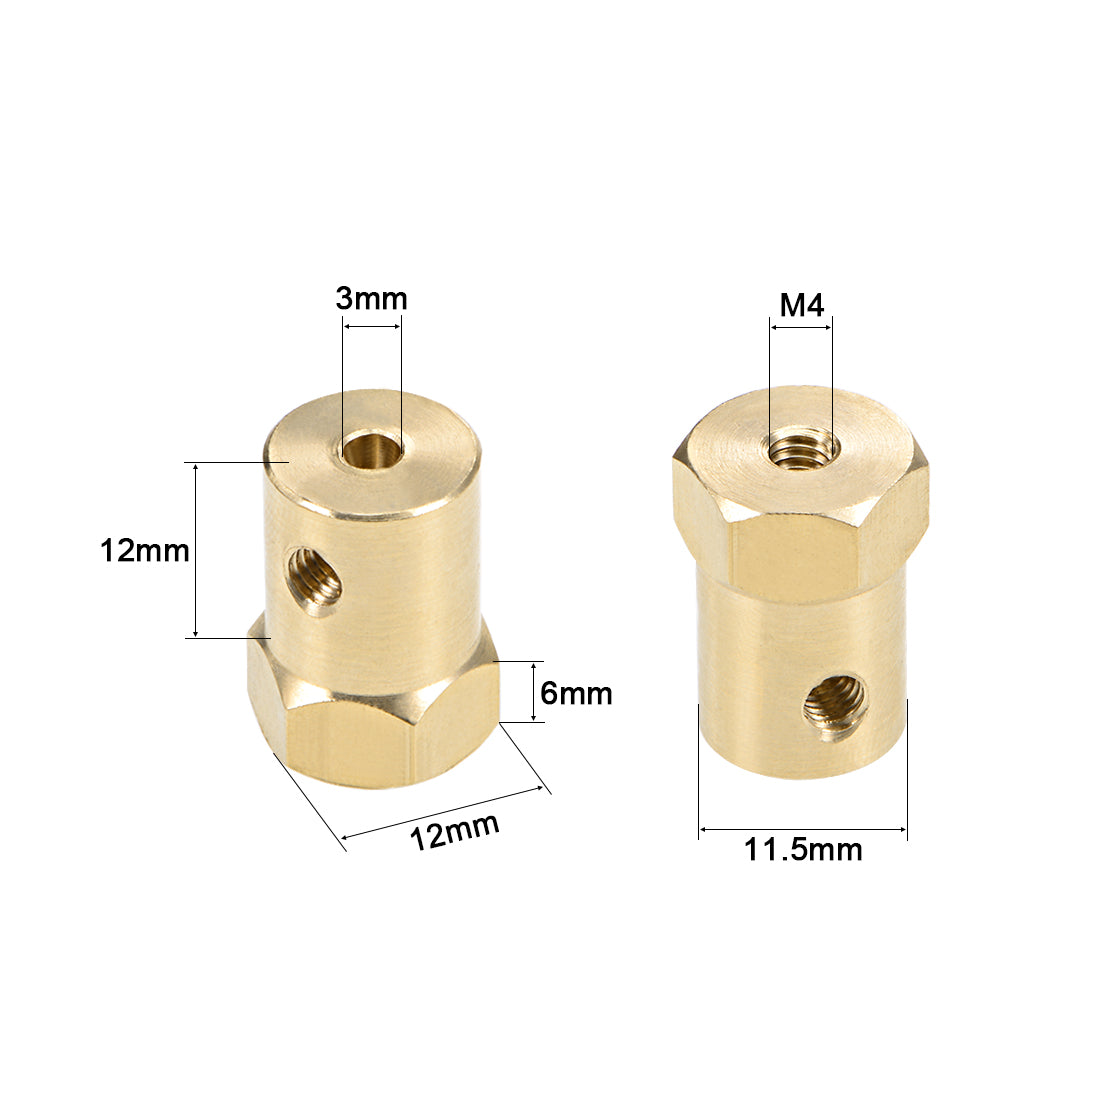 Uxcell Uxcell Hex Coupler 5mm Bore Motor Hex Brass Shaft Coupling Flexible Connector for Car Wheels Tires Shaft Motor 2pcs